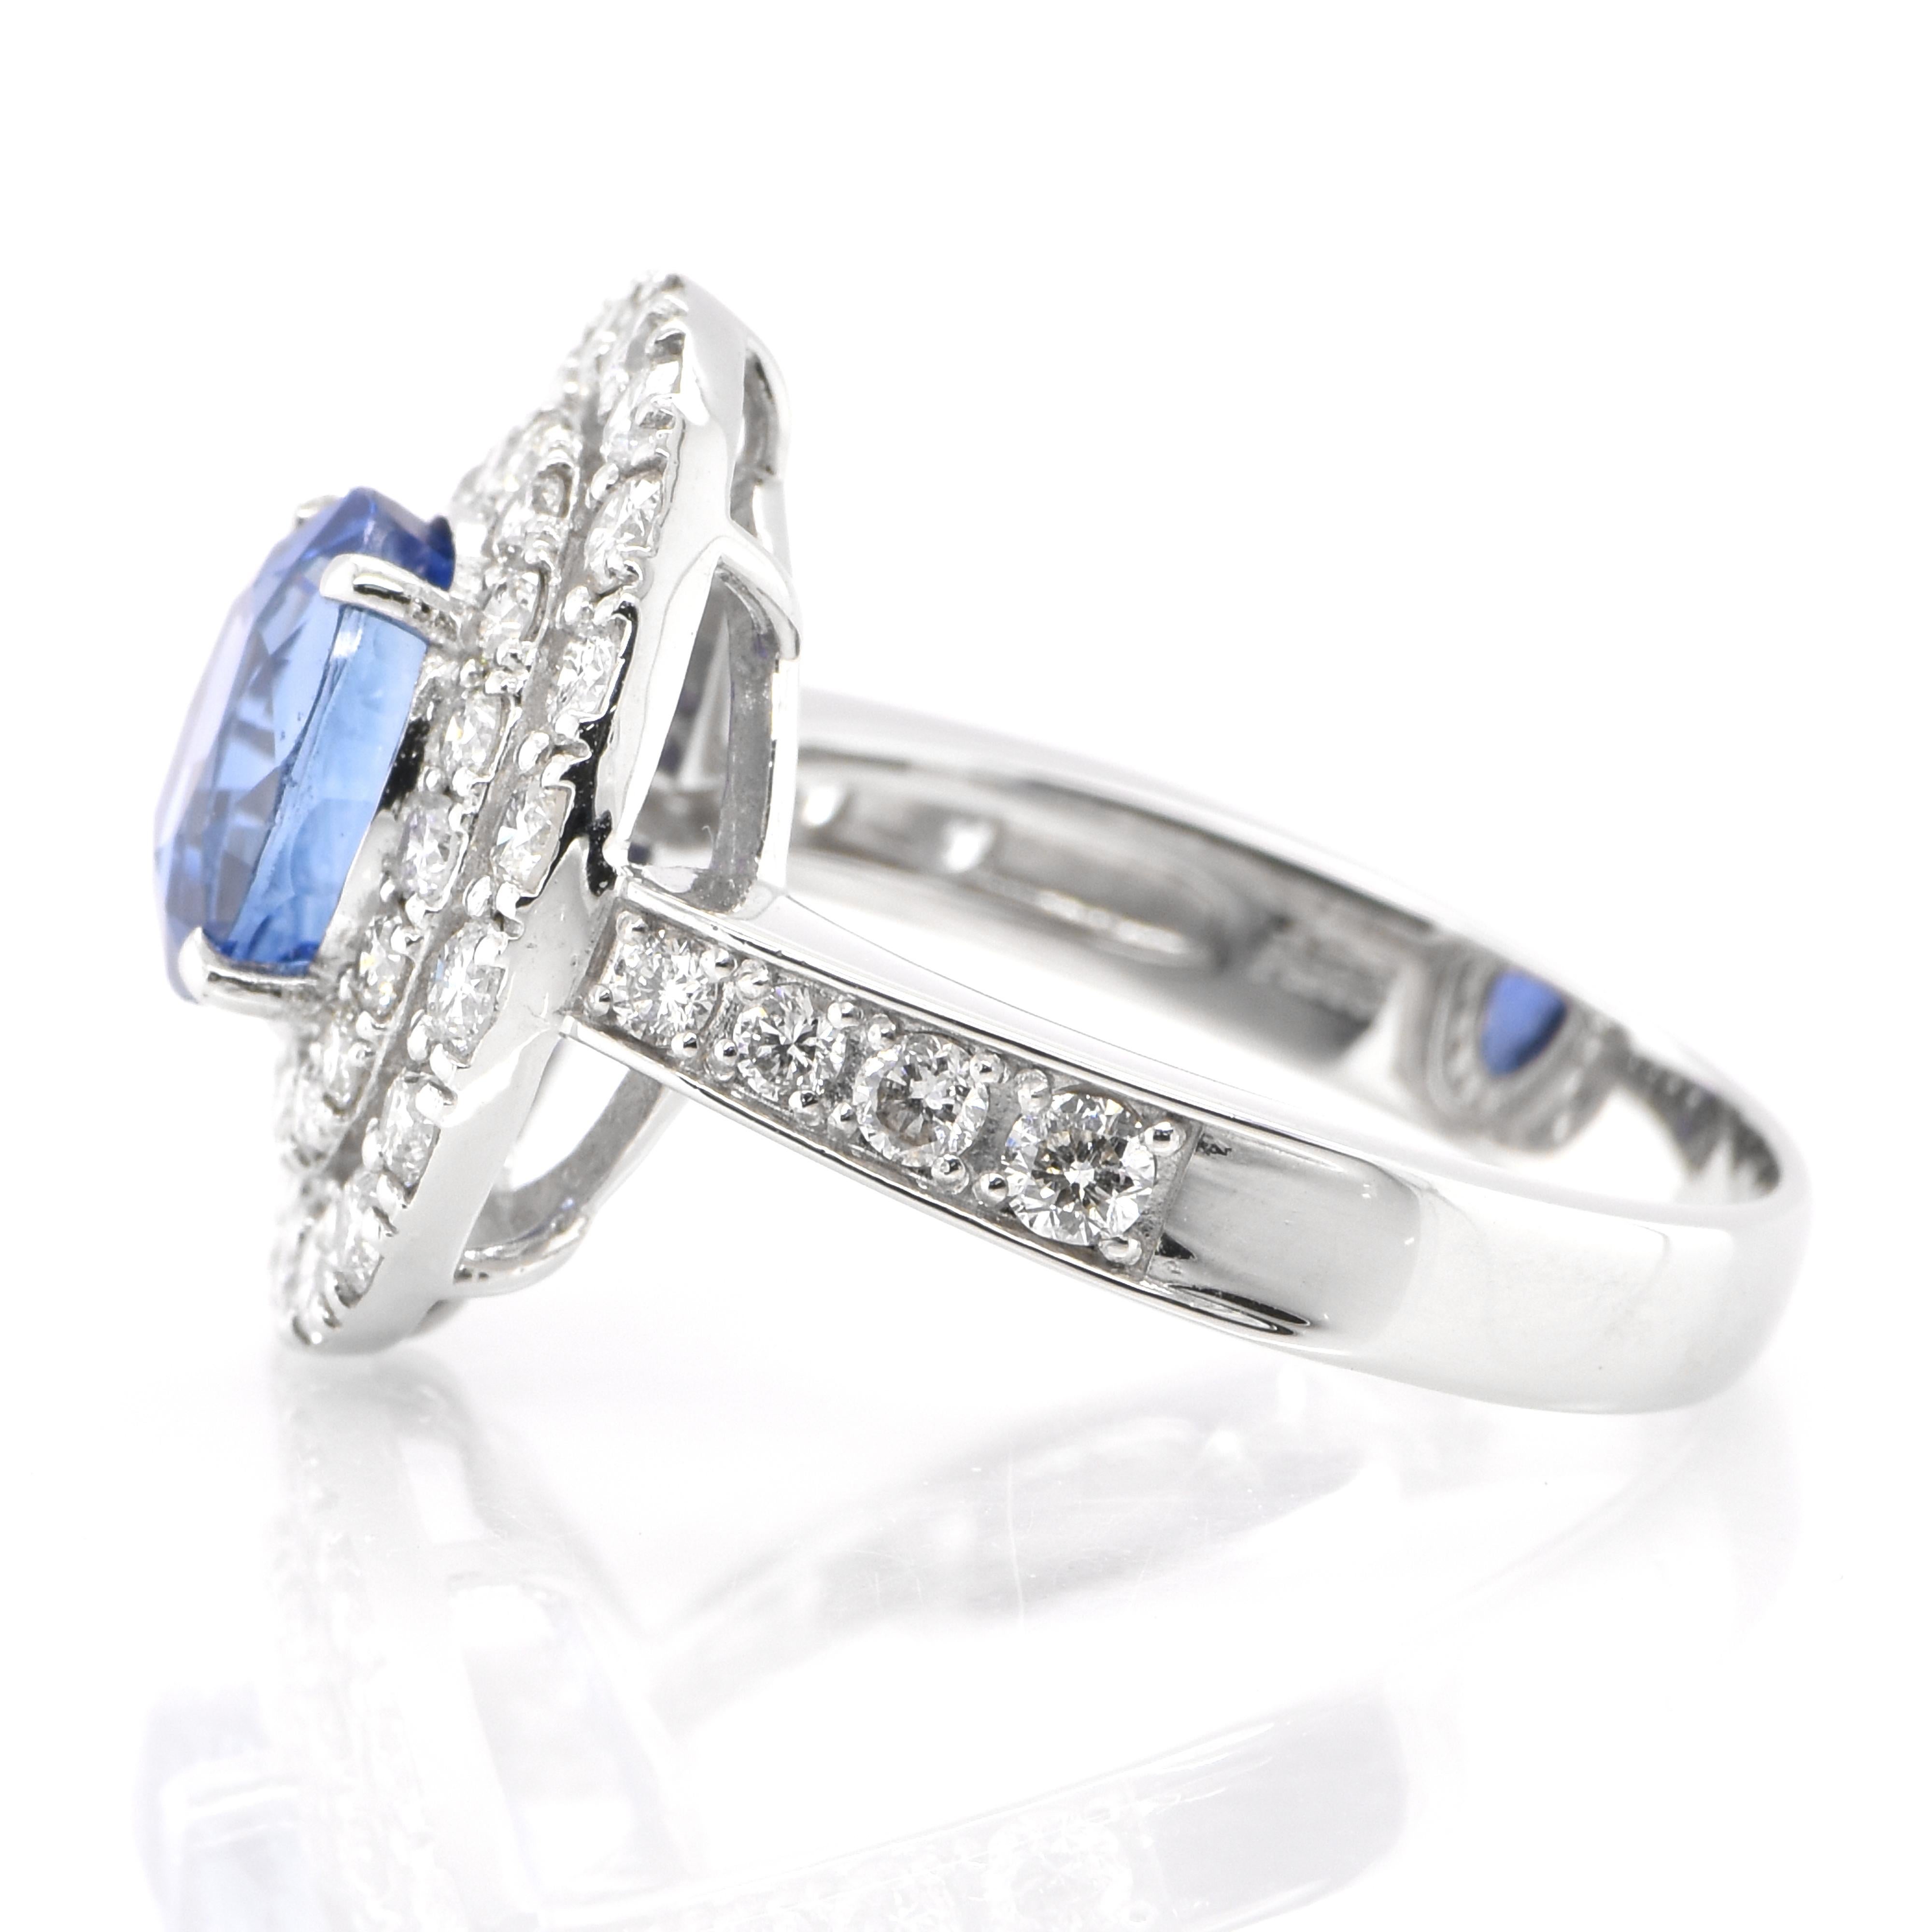 Oval Cut 2.39 Carat Natural Blue Sapphire and Diamond Double Halo Ring Made in Platinum